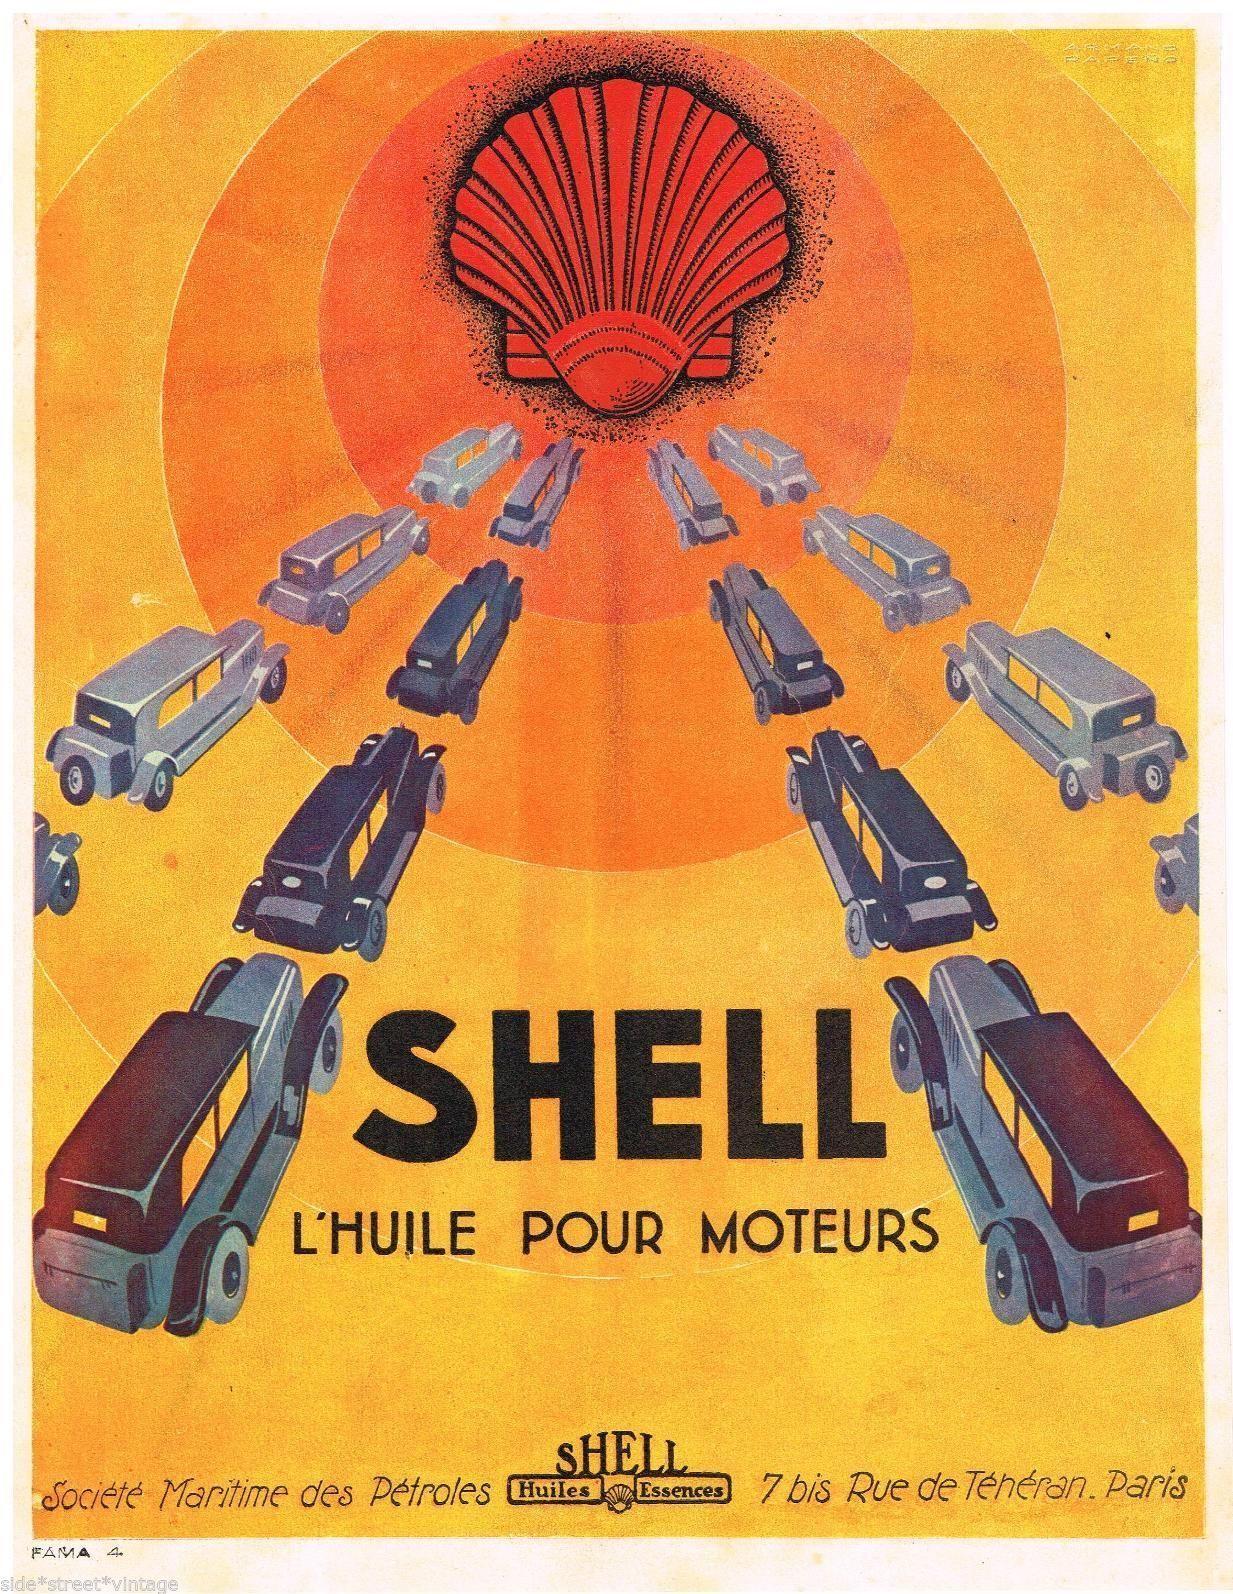 Old Shell Logo - Vintage Advertising RARE COLOUR EARLY SHELL OIL AD SHELL LOGO 1920's ...